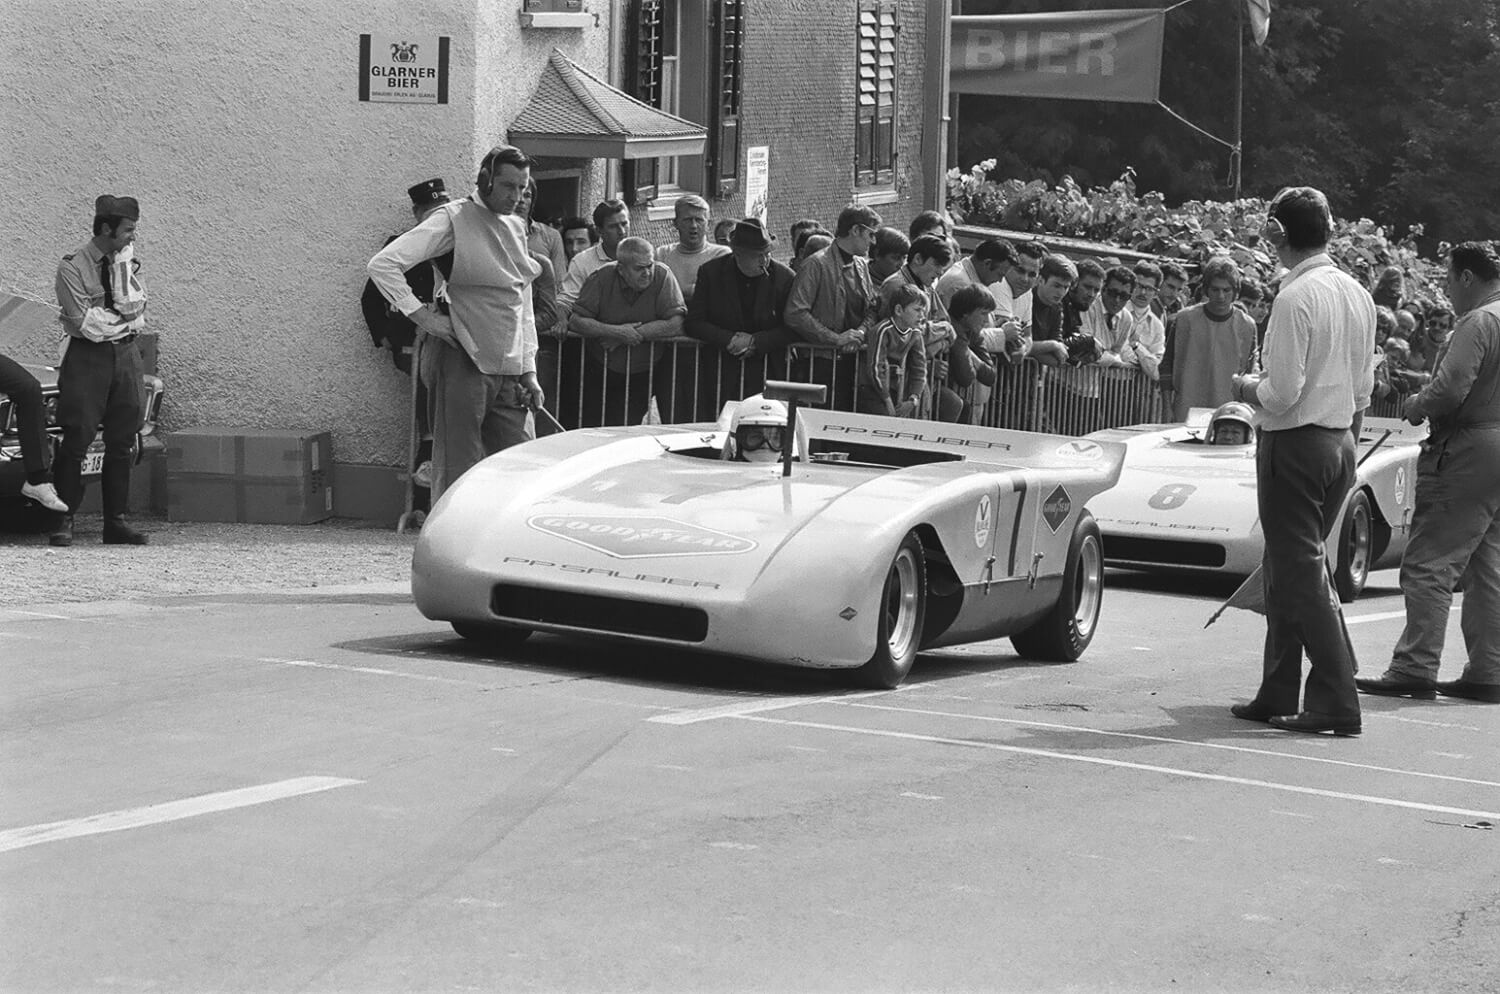 Peter Sauber takes off in his Sauber C1 for the 1970 Kerenzerberg race.